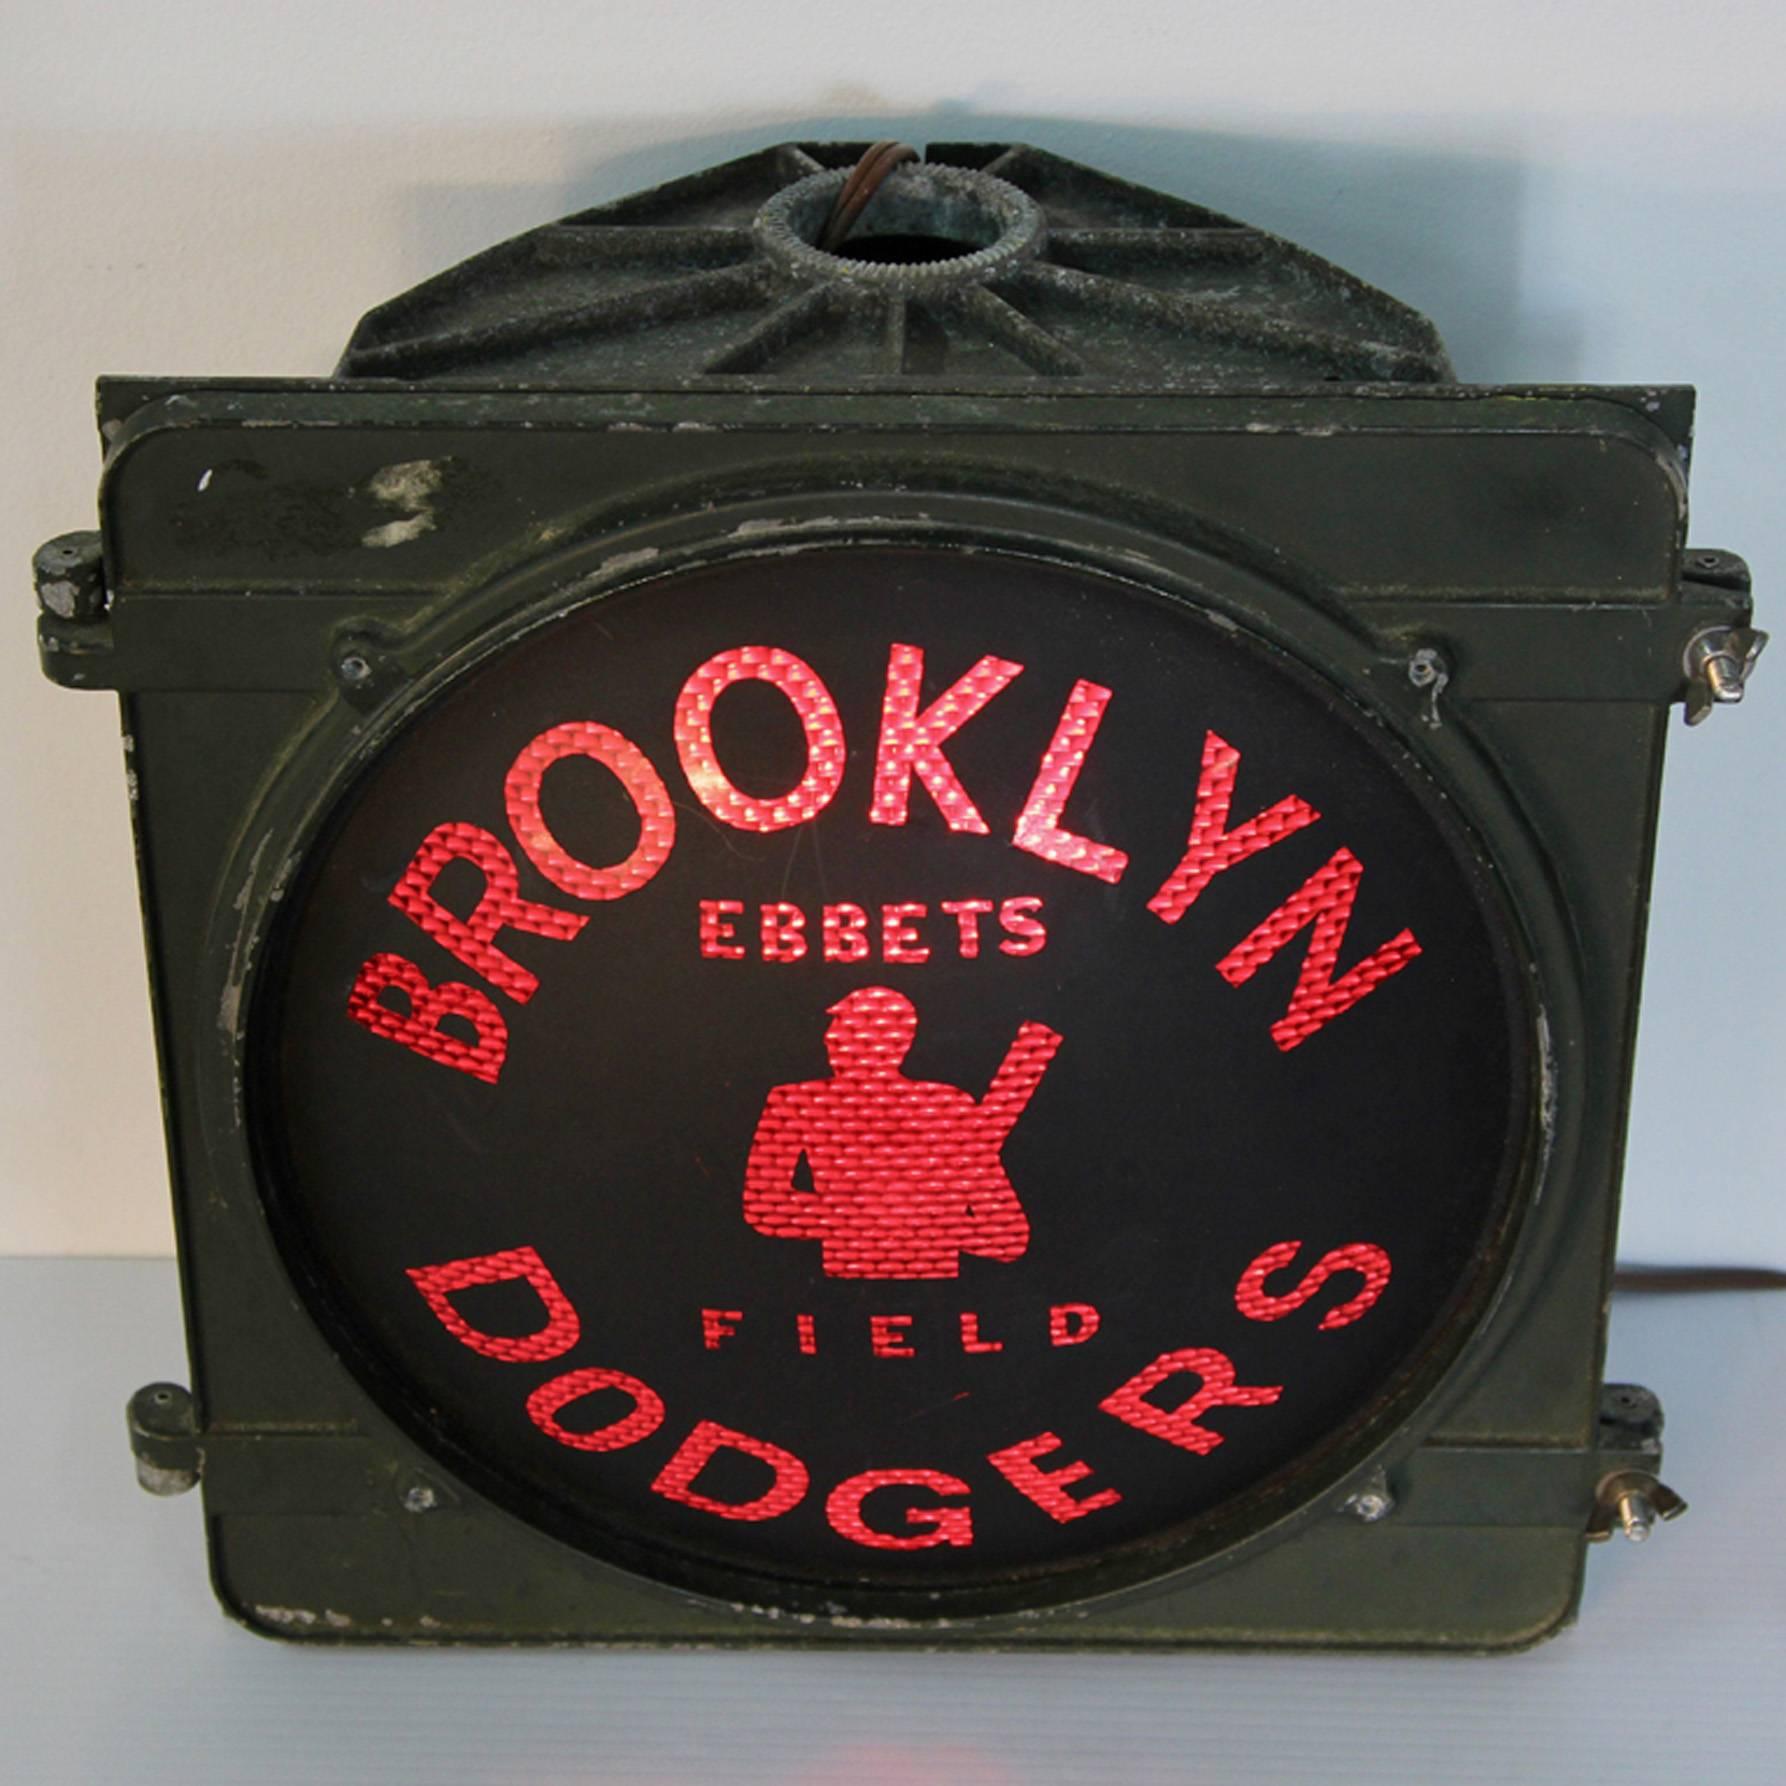 Brooklyn Dodgers industrial stadium light from Ebbets Field. Wired to plug into standard outlet. Curved glass with graphics produces deep red light. Ebbets Field was a major league baseball stadium in the Flatbush section of Brooklyn, New York. It